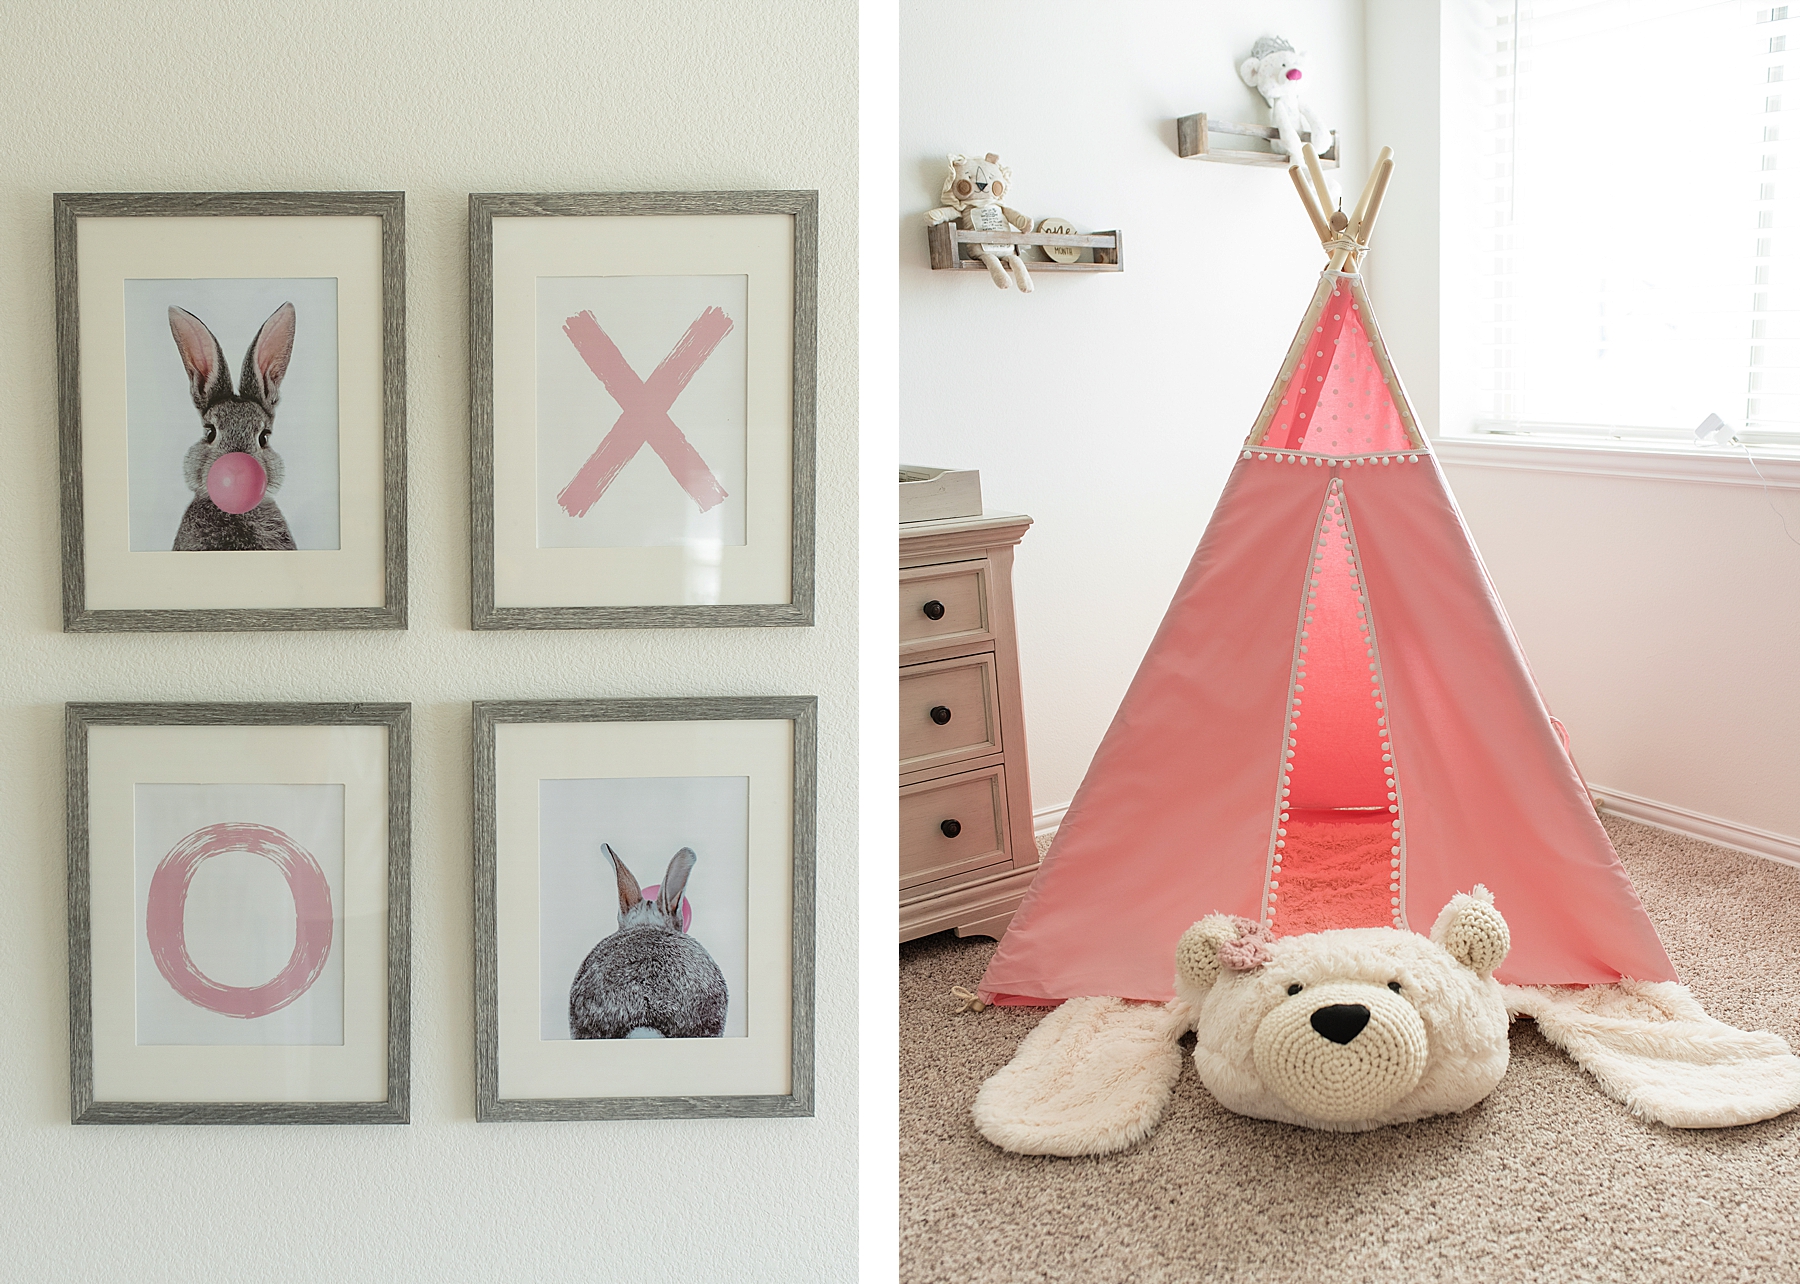 Pink and white nursery for newborn baby girl | In-Home Newborn Photo Session | Lindsey Dutton Photography | Dallas Area Family Photographer | newborn session, newborn posing ideas, newborn photos, girl nursery inspiration | via lindseyduttonphotography.com